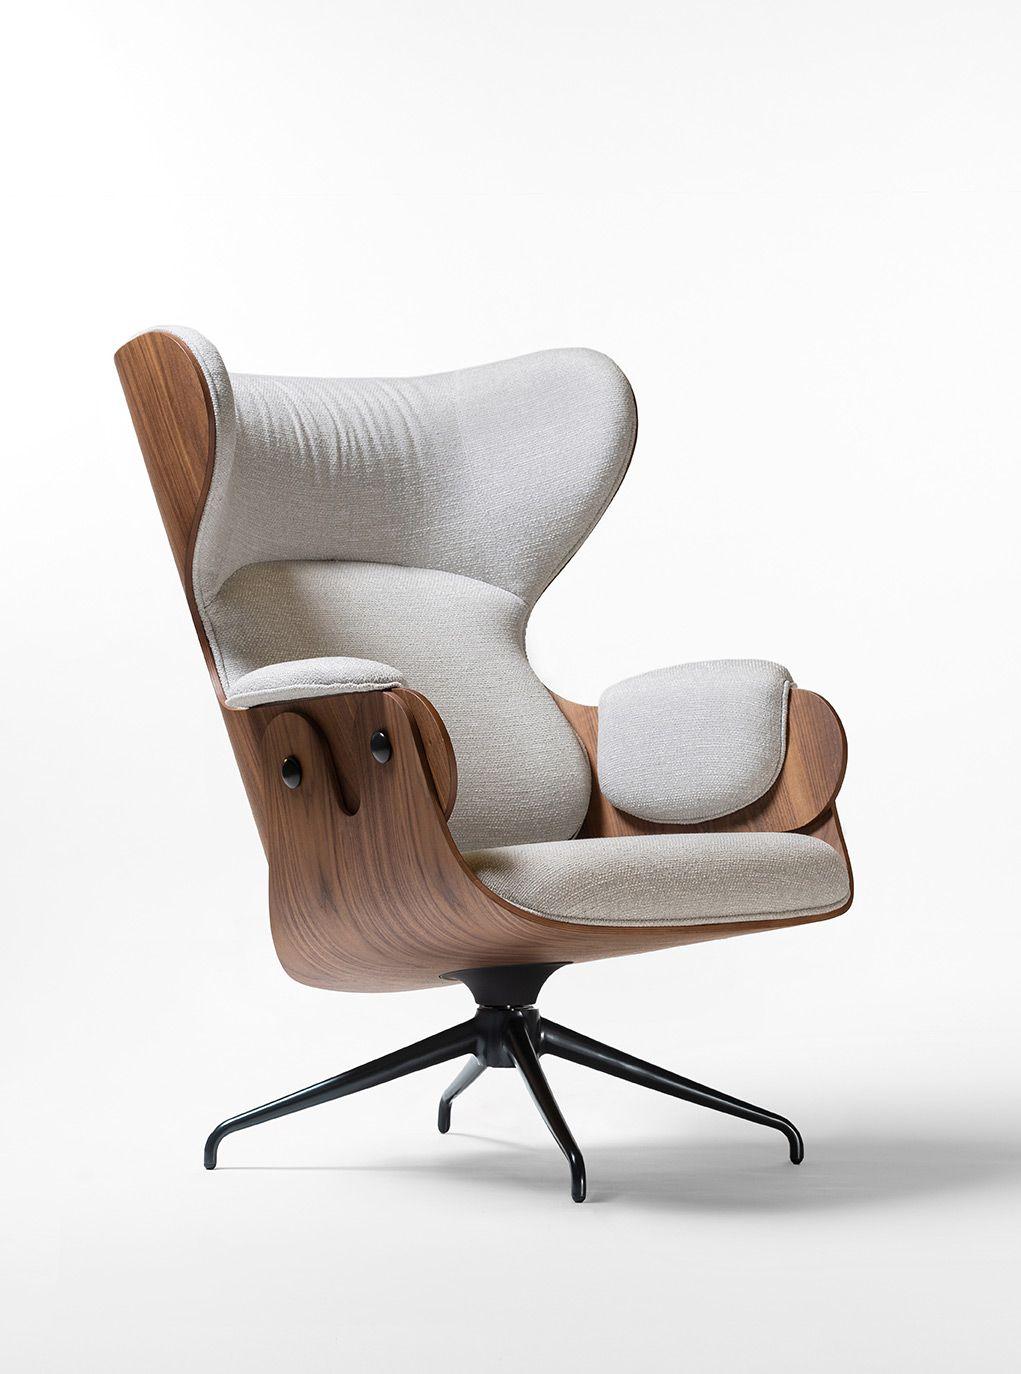 Spanish Lounger Brown Armchair by Jaime Hayon For Sale